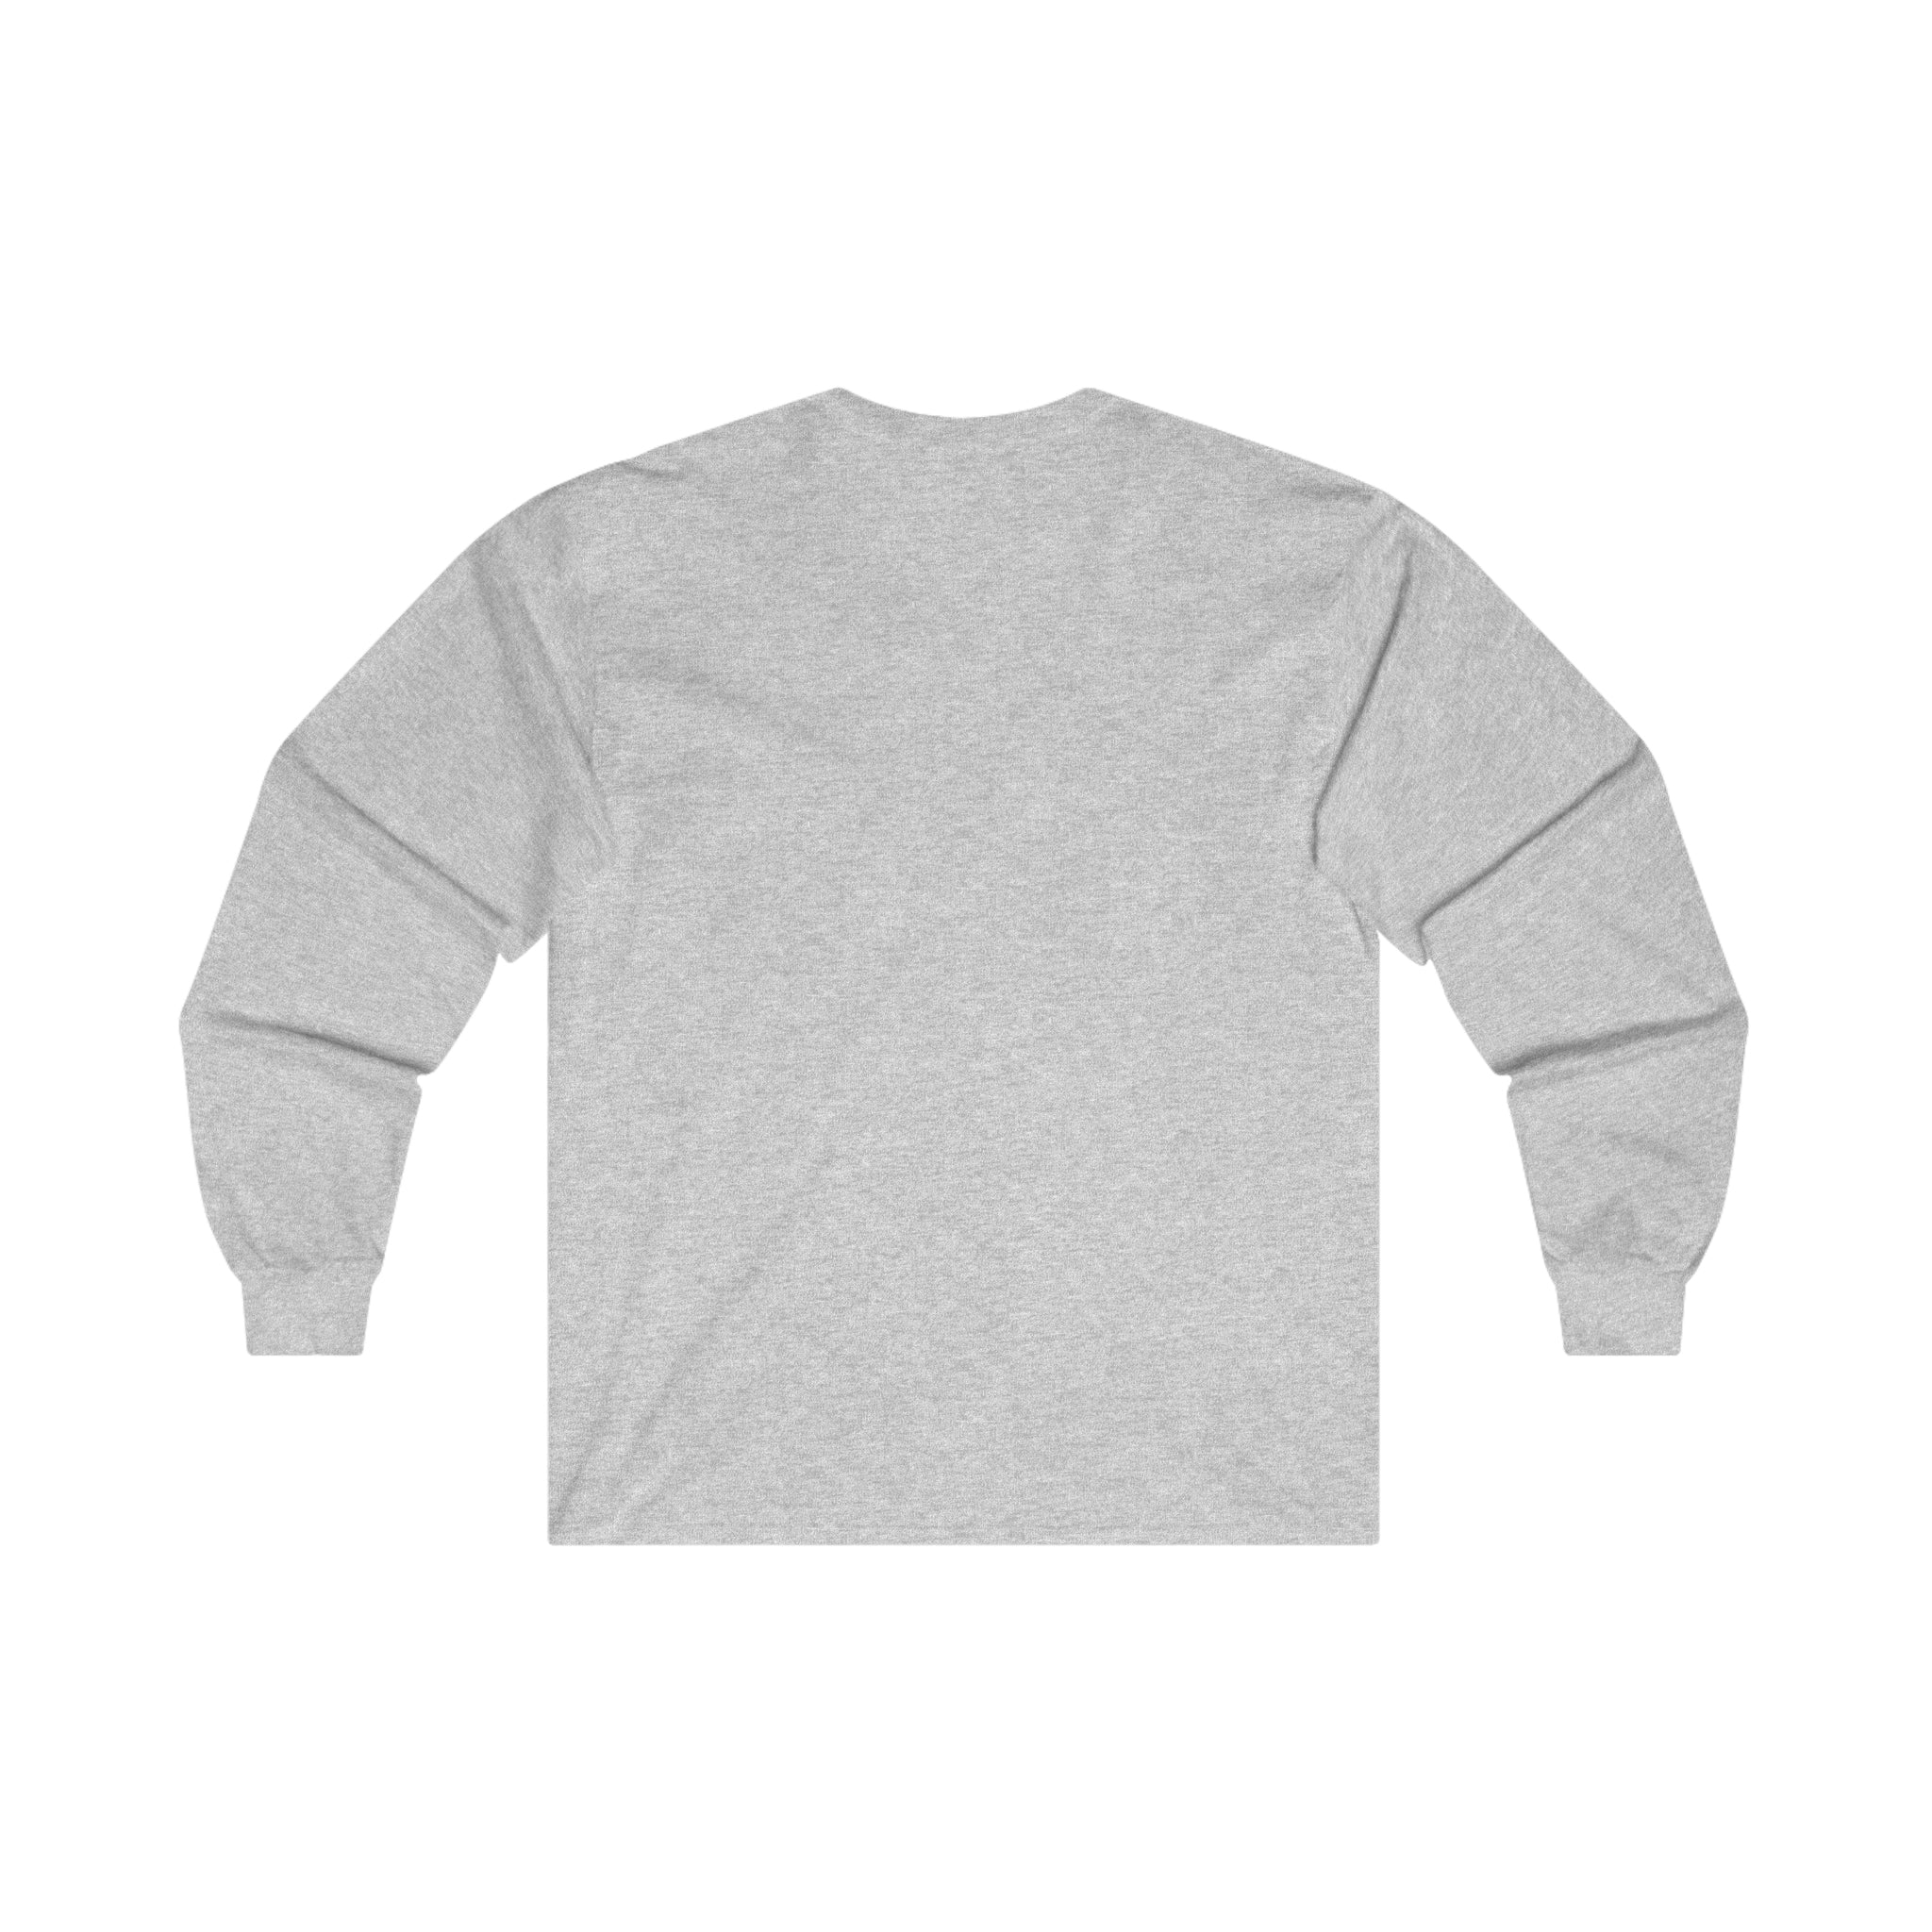 Gods Hand Passing Nicotine Pouches - Ultra Cotton Long Sleeve Tee